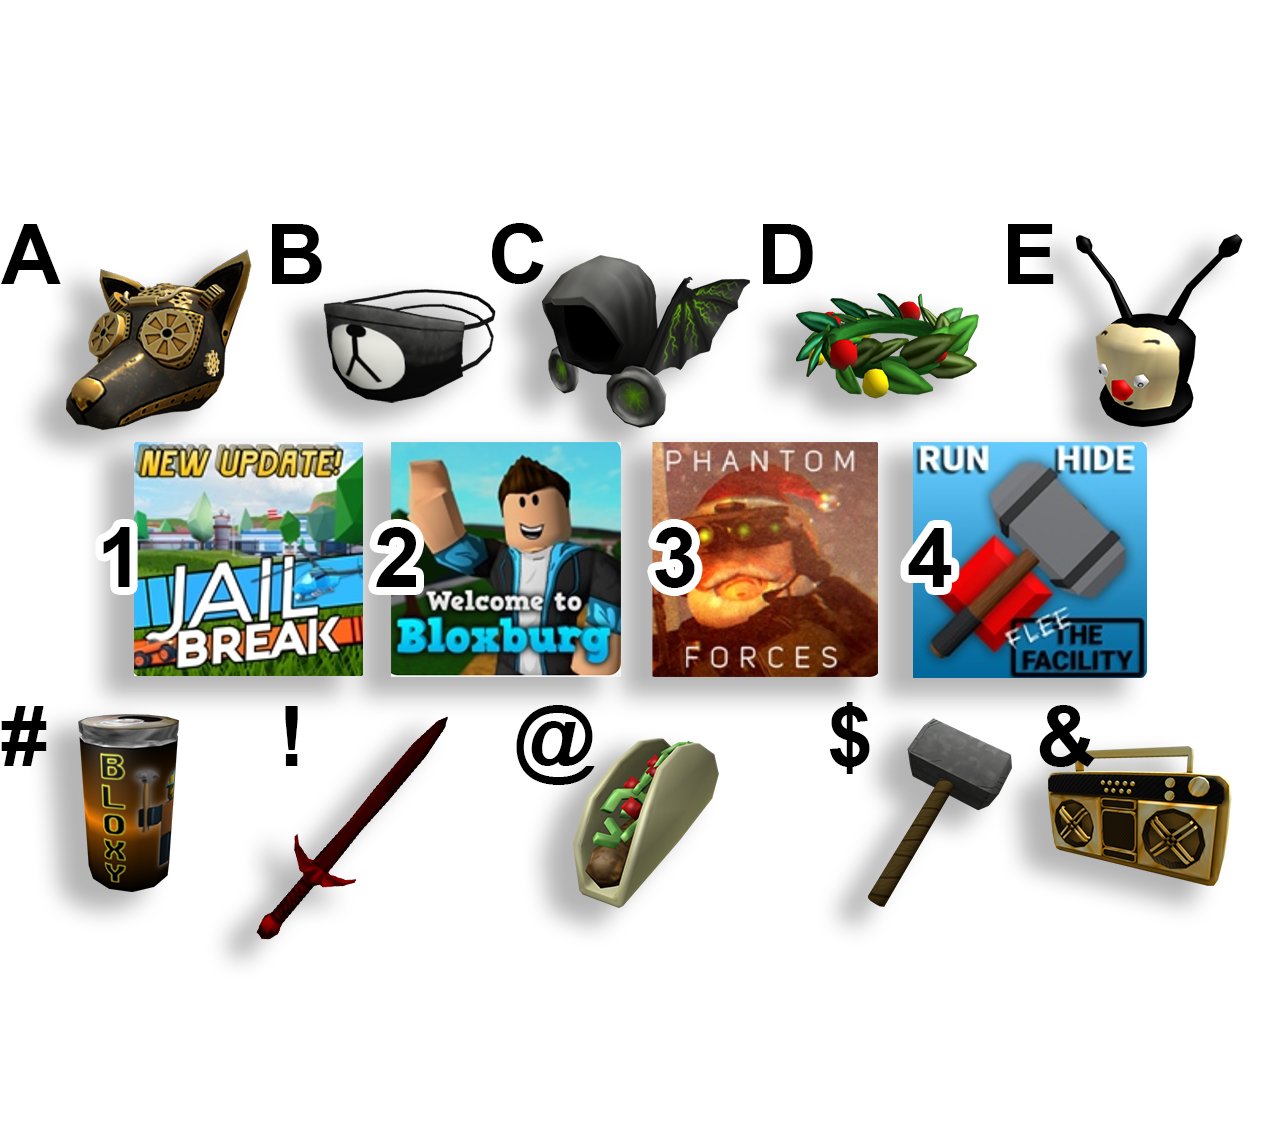 Roblox On Twitter Which Combo Are You Picking For The Ultimate Roblox Experience - roblox on twitter flashbackfriday have you seen these billboards in your favorite place you may recognize them from this 07 contest https t co pcwbhrzbrq https t co y7niznbtod